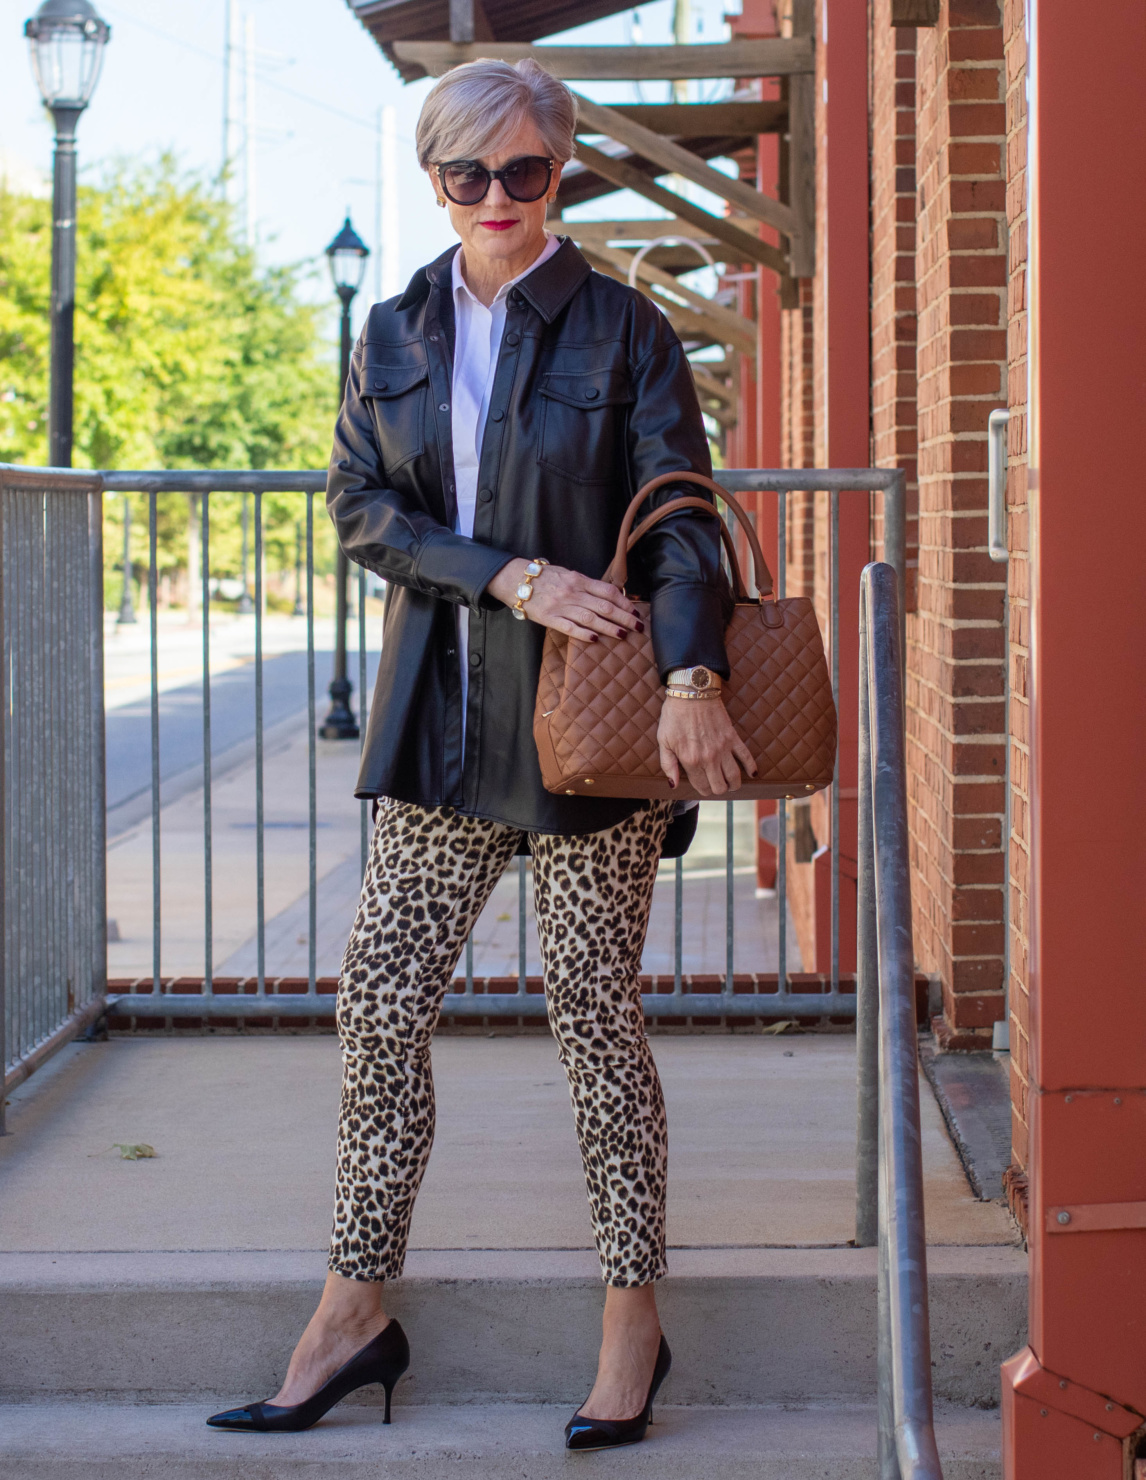 Leather shirt and leopard jeans for a fun, chic fall look